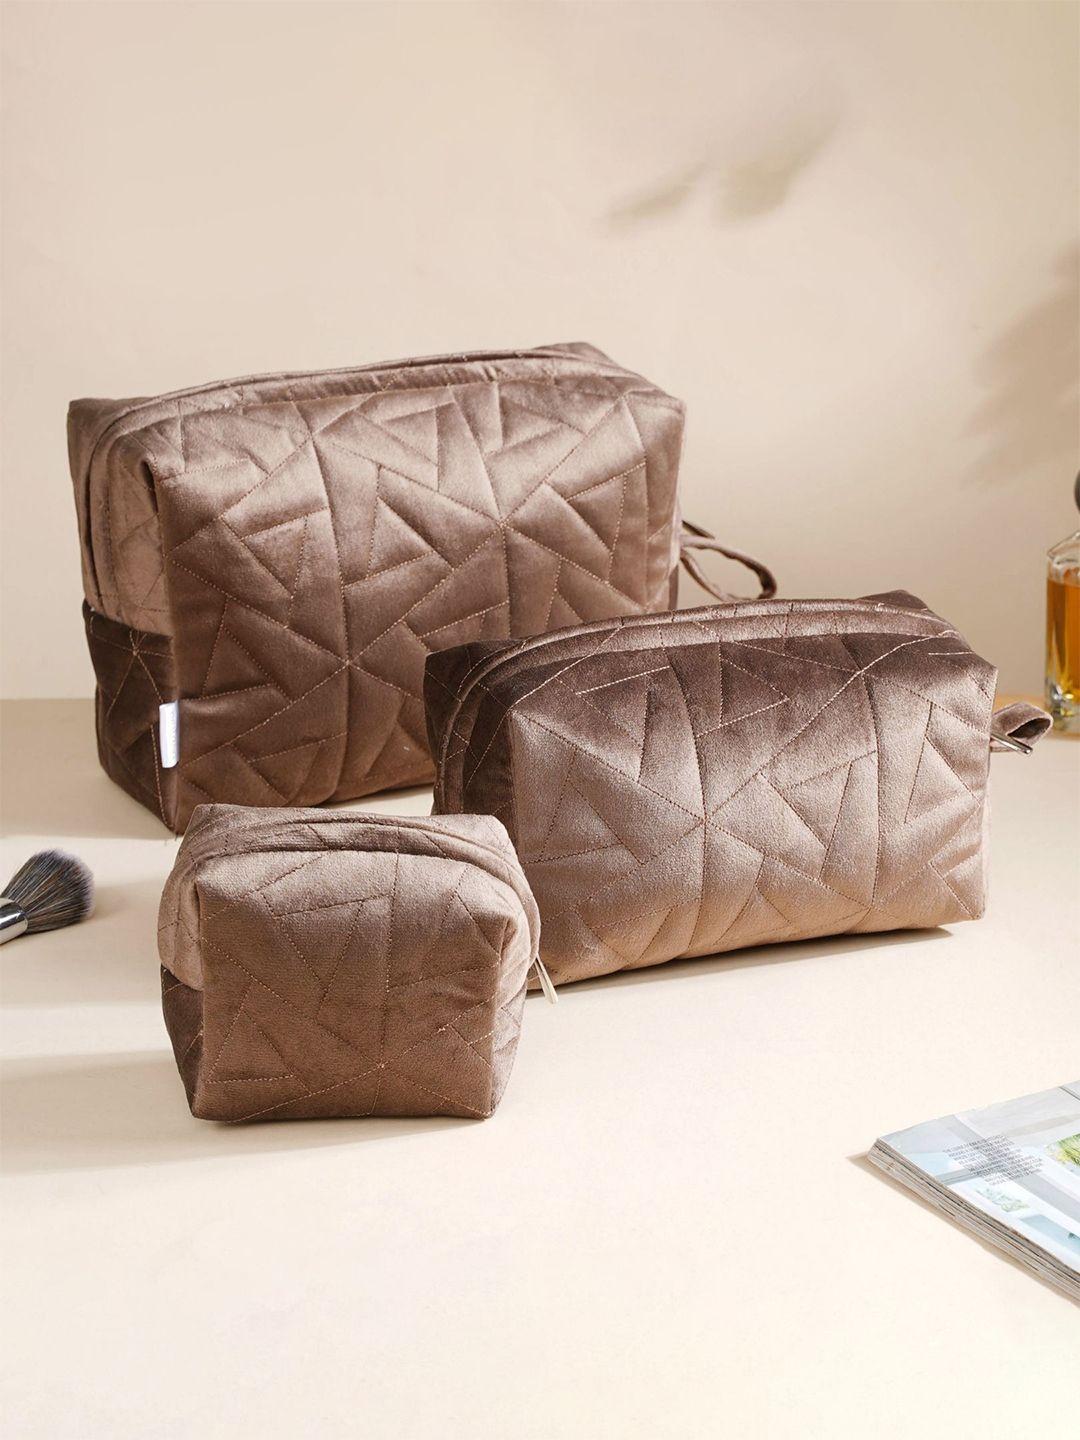 nestasia set of 3 brown quilted multi-utility cosmetic bag organisers